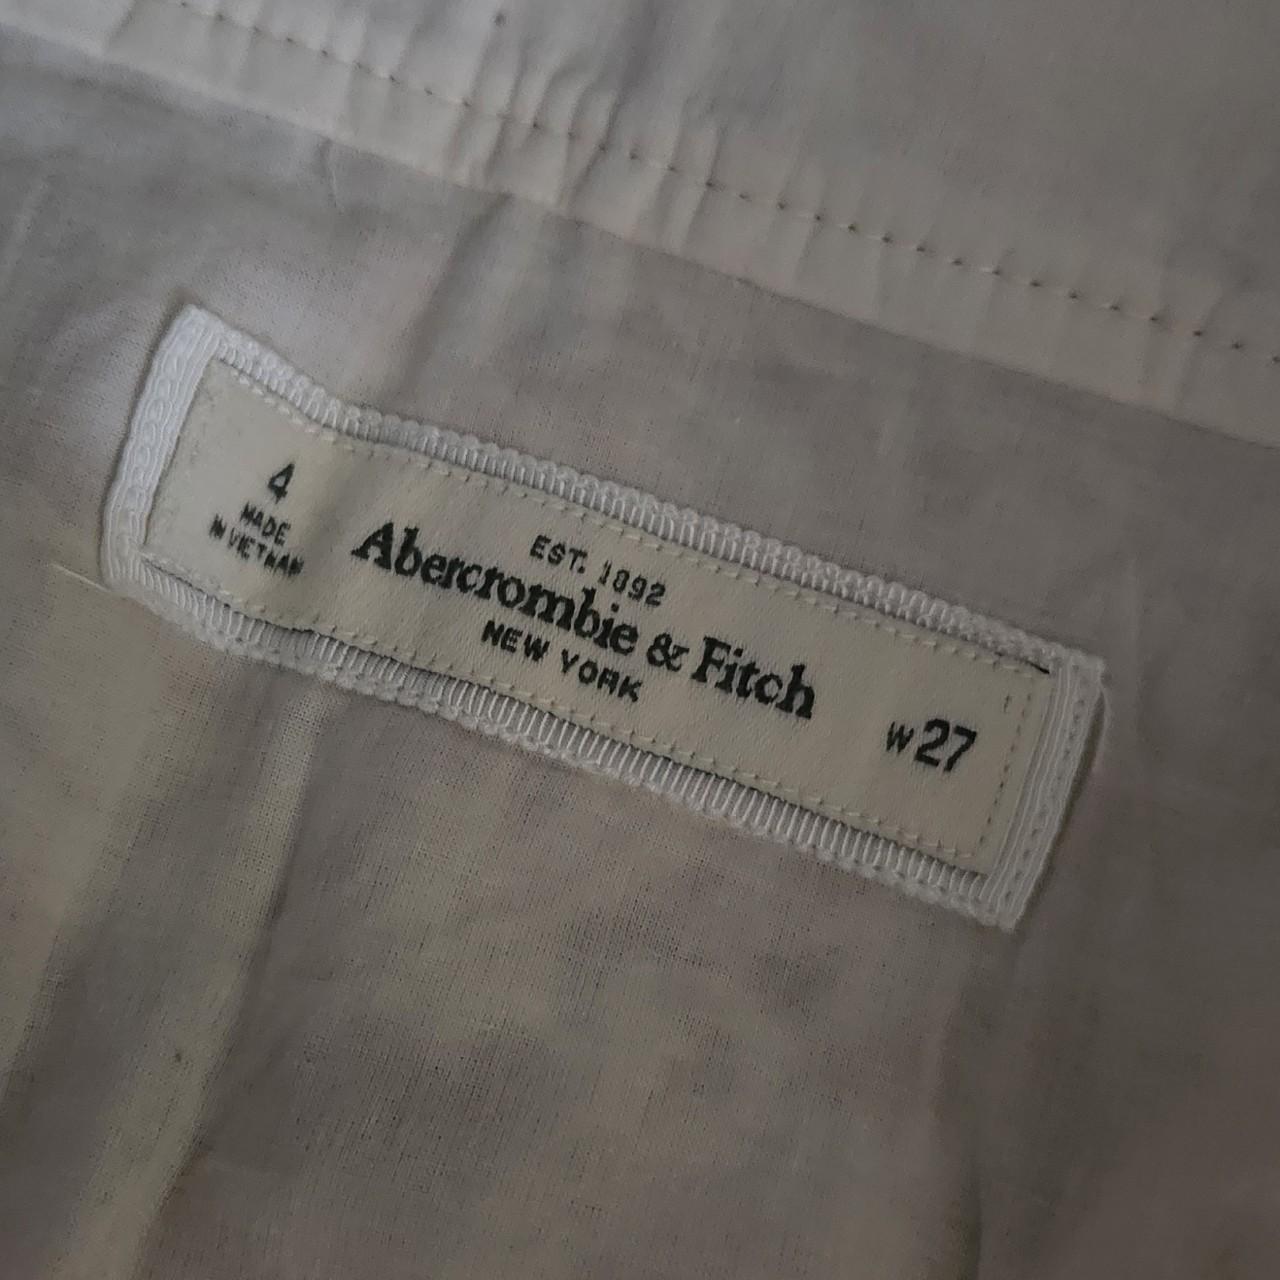 Abercrombie & Fitch Women's White and Gold Skirt (3)